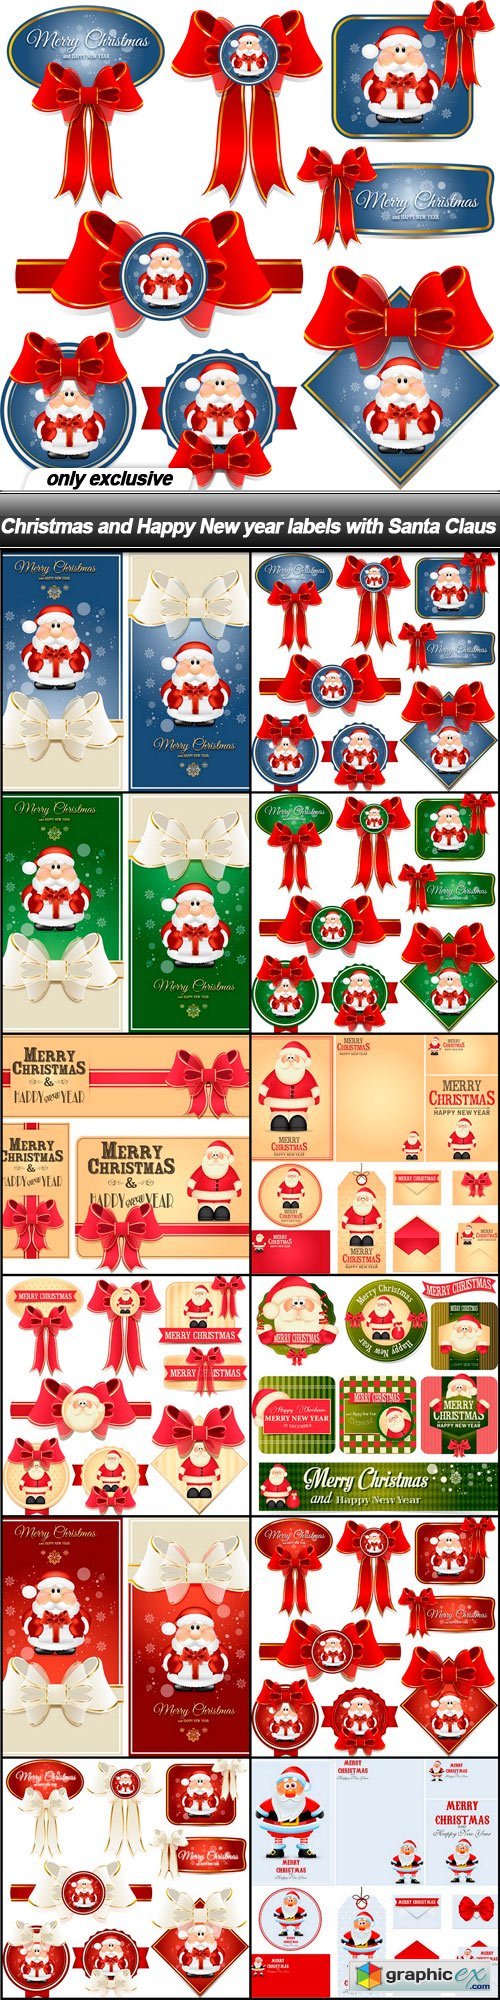 Christmas and Happy New year labels with Santa Claus - 12 EPS